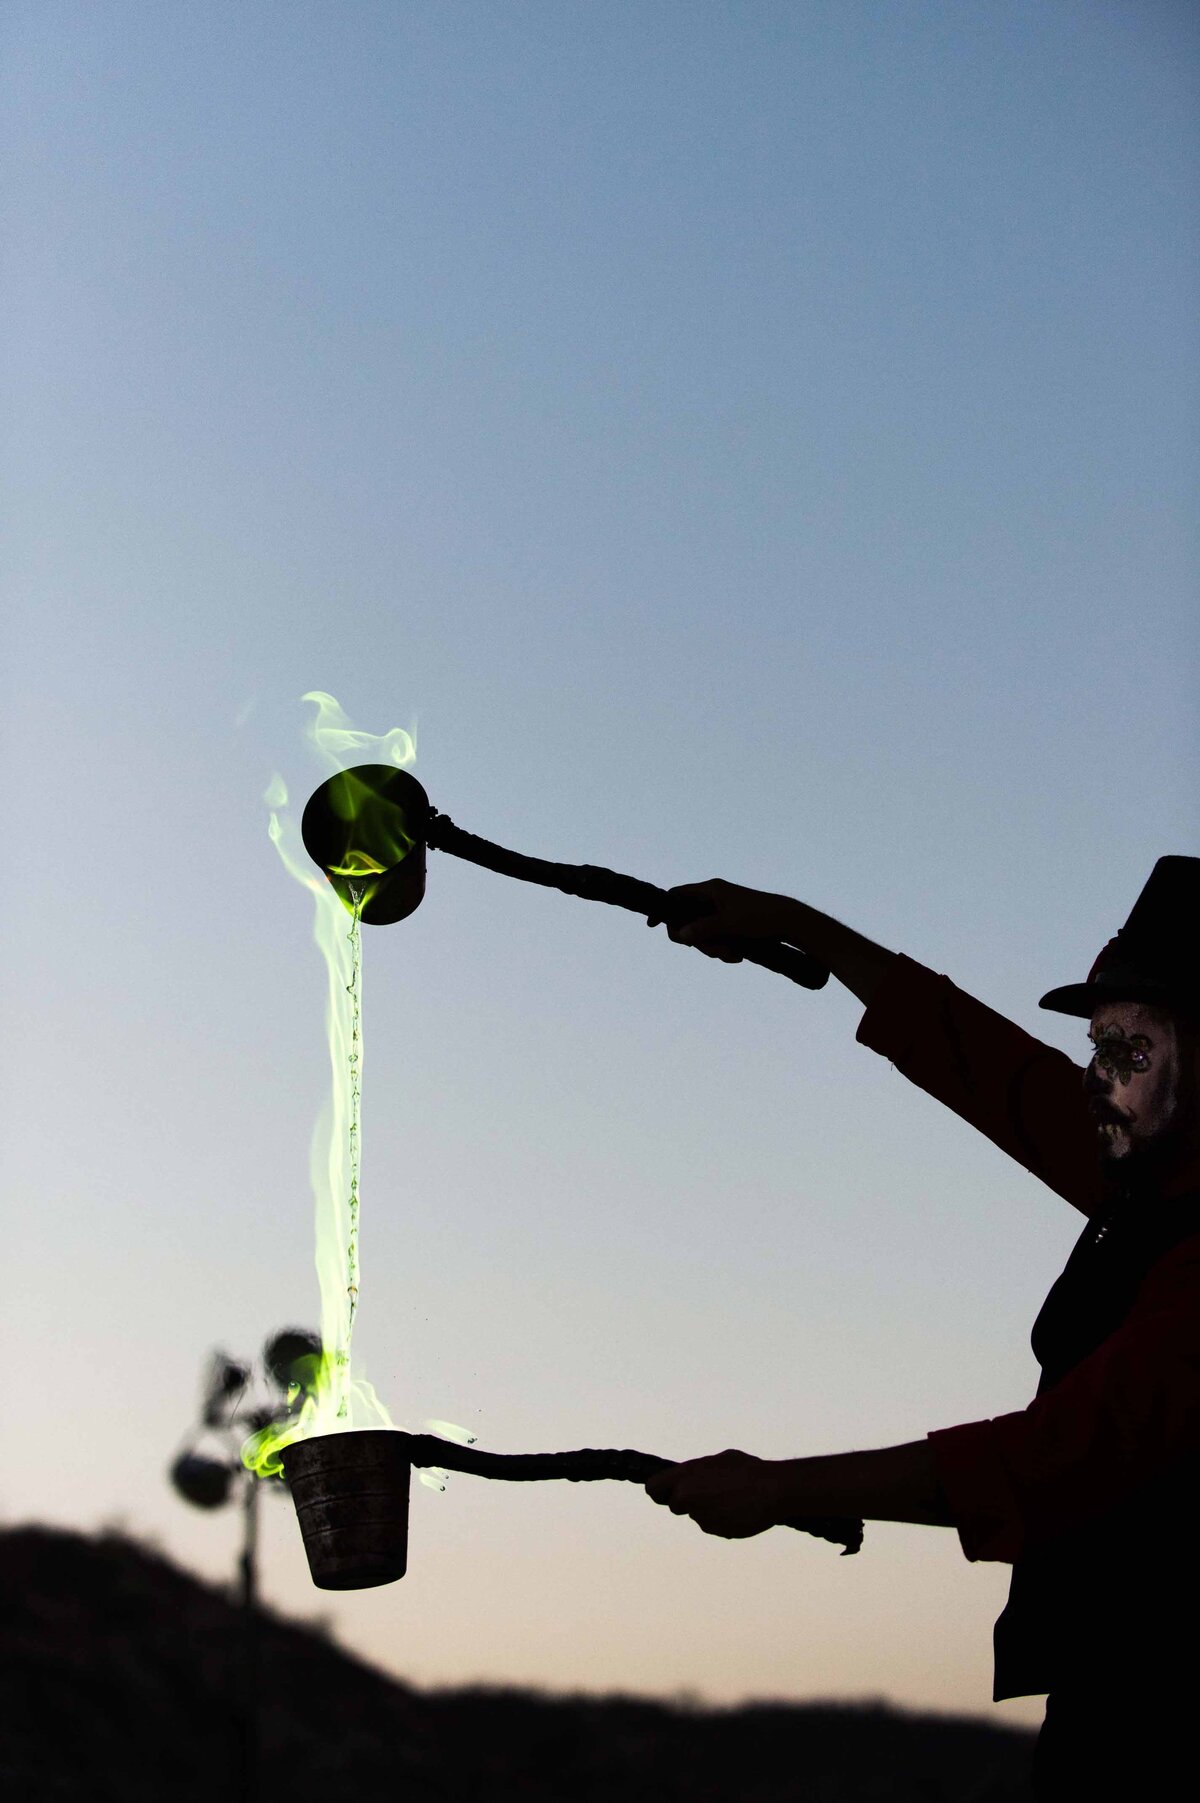 An entertainer pours fire in a bucket for entertainment